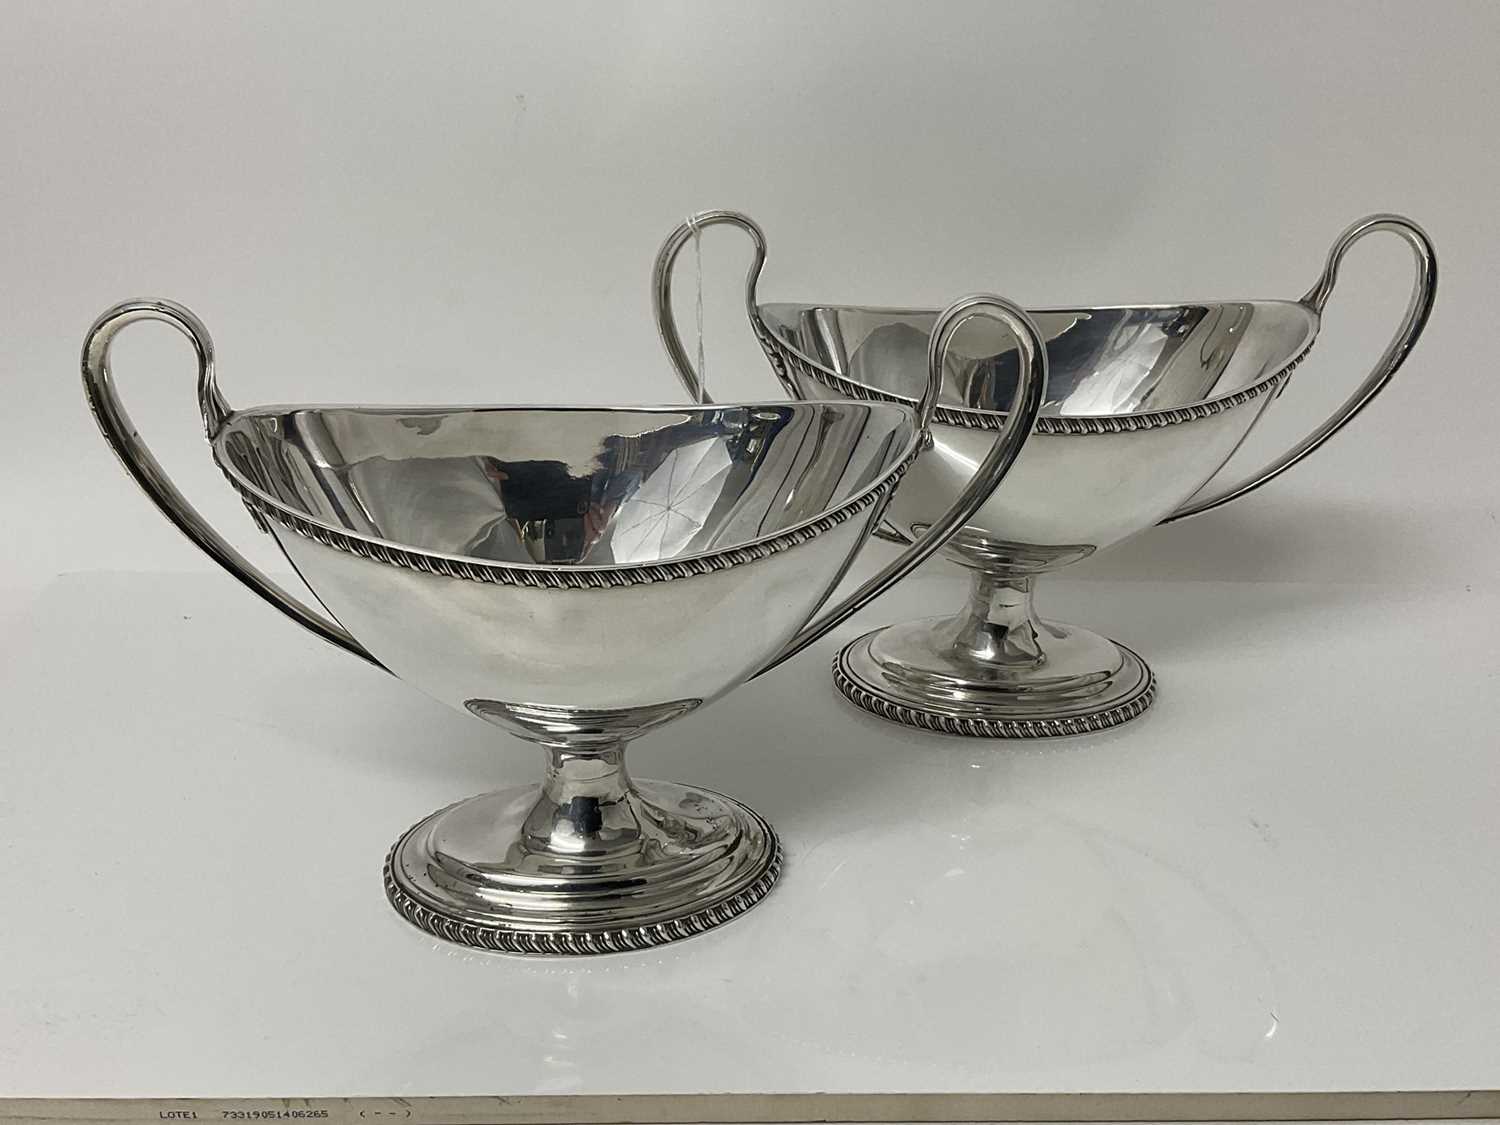 Lot 63 - Pair of 19th century silver plated two handed dishes of navette form with loop handles and gadrooned borders, on oval pedestal foot, 26cm wide